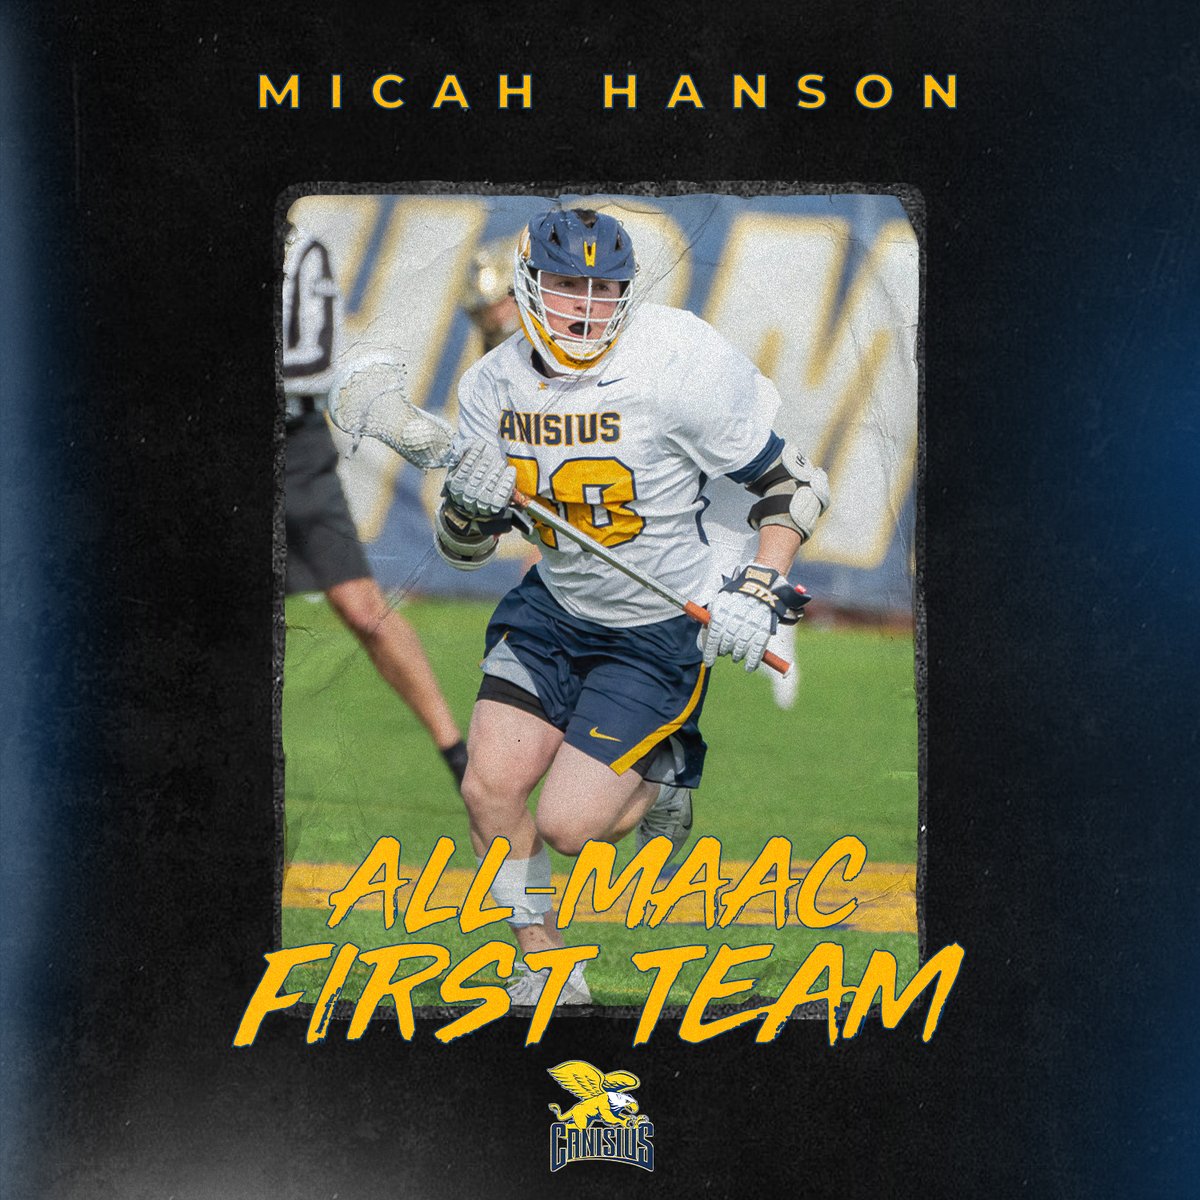 Congratulations to sophomore Micah Hanson on being named to the All-@MAACSports First Team and MAAC Face-off Specialist of the Year! Hanson ranked second in the league in face-off wins (184) while leading the circuit in ground balls (120) #Griffs